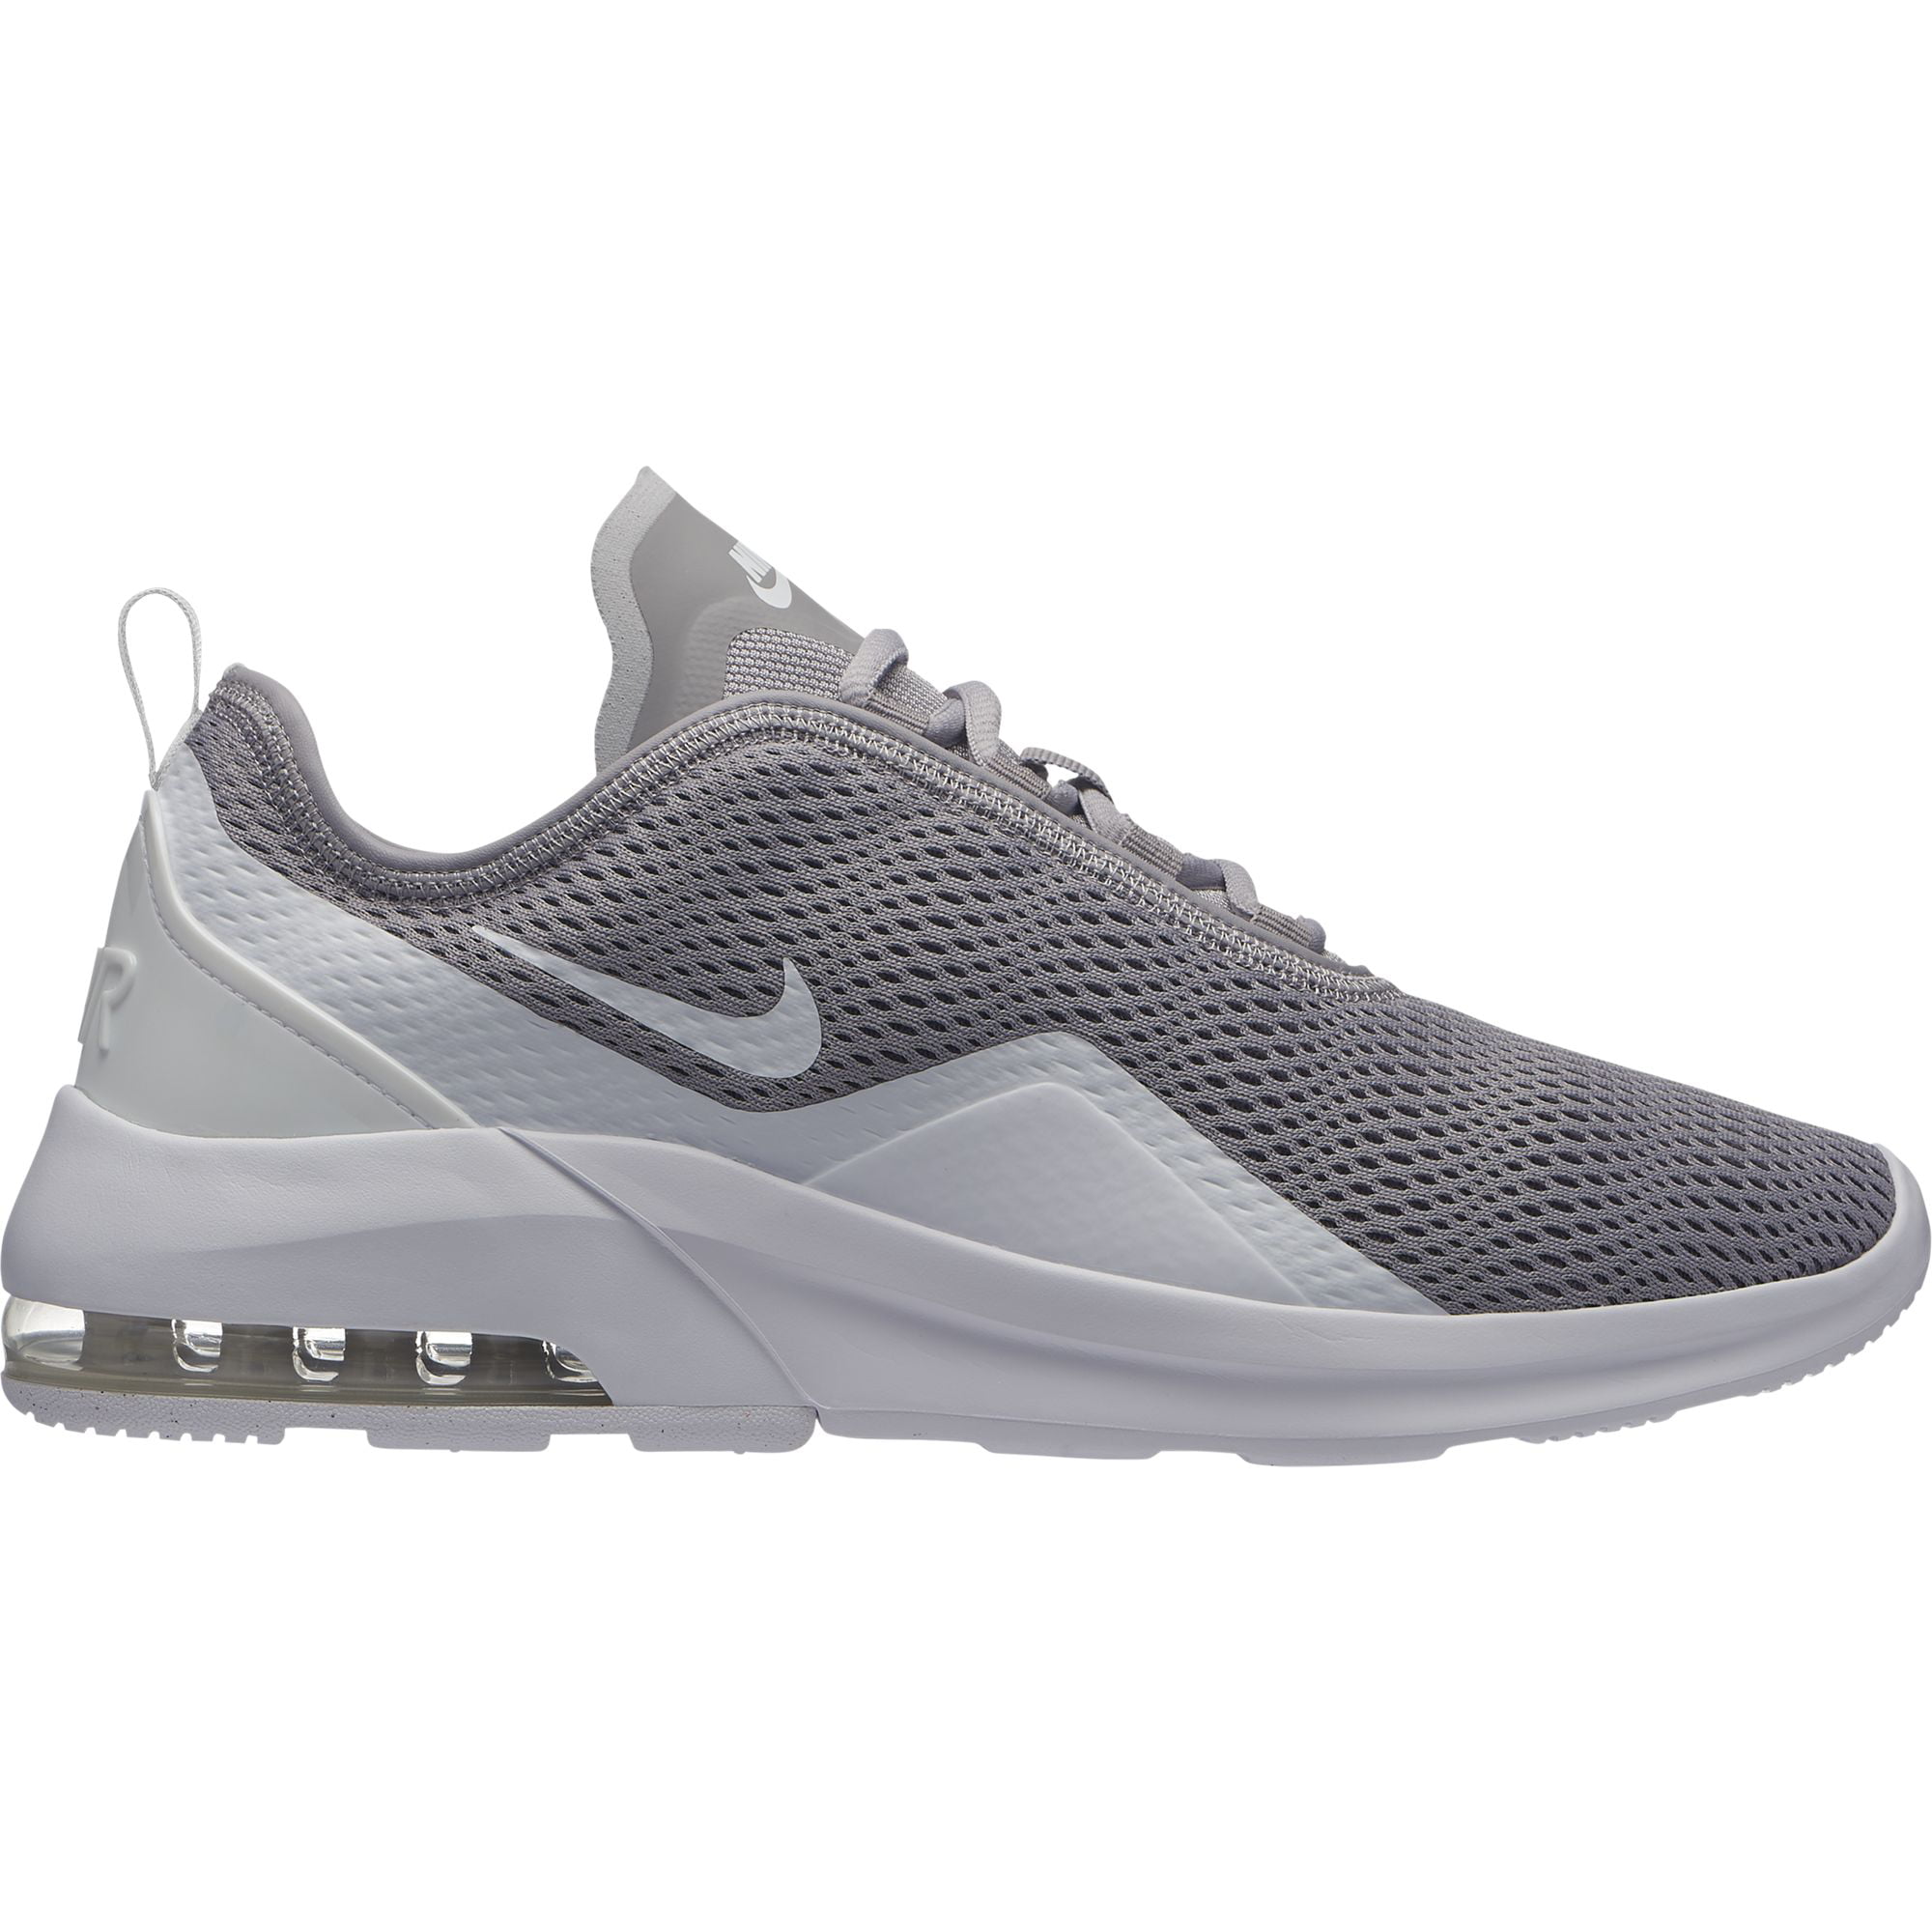 nike air max motion men's athletic shoes